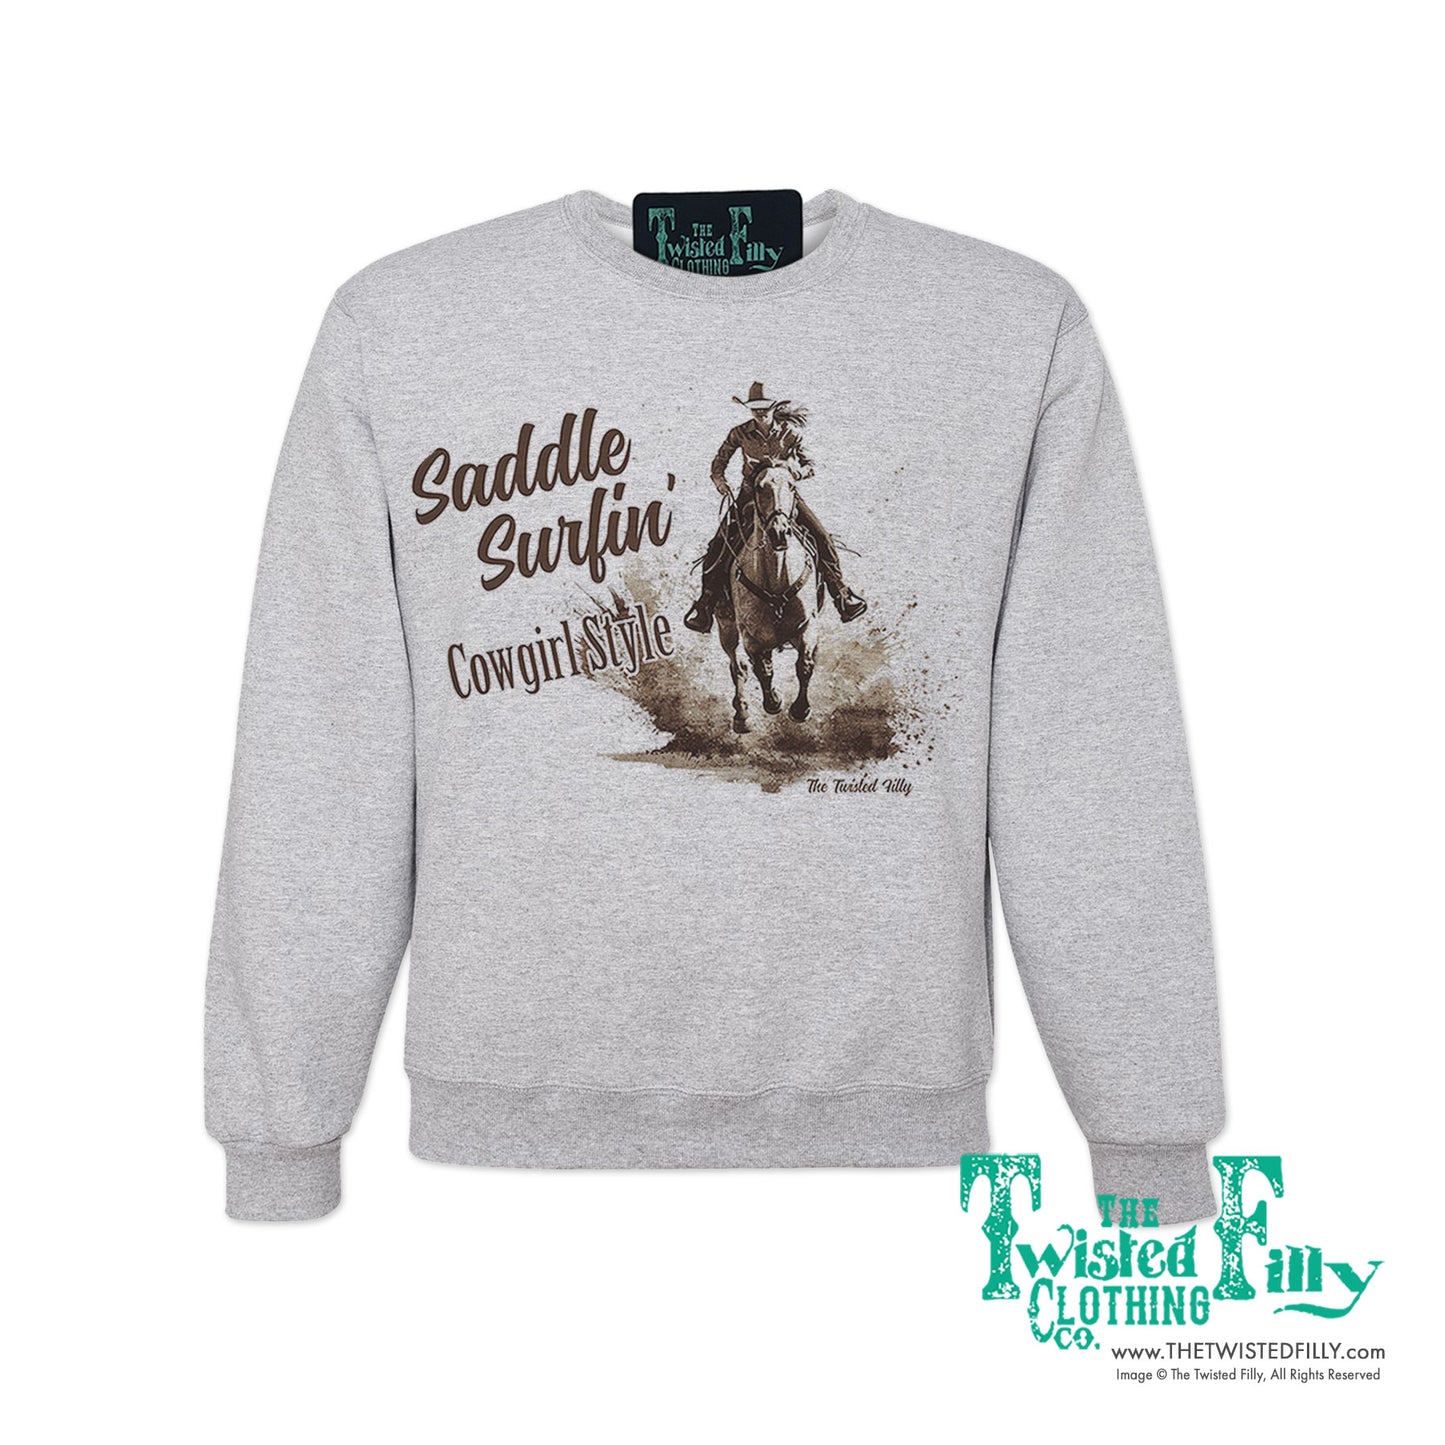 Saddle Surfin' Cowgirl Style - Adult Womens Sweatshirt - Assorted Colors